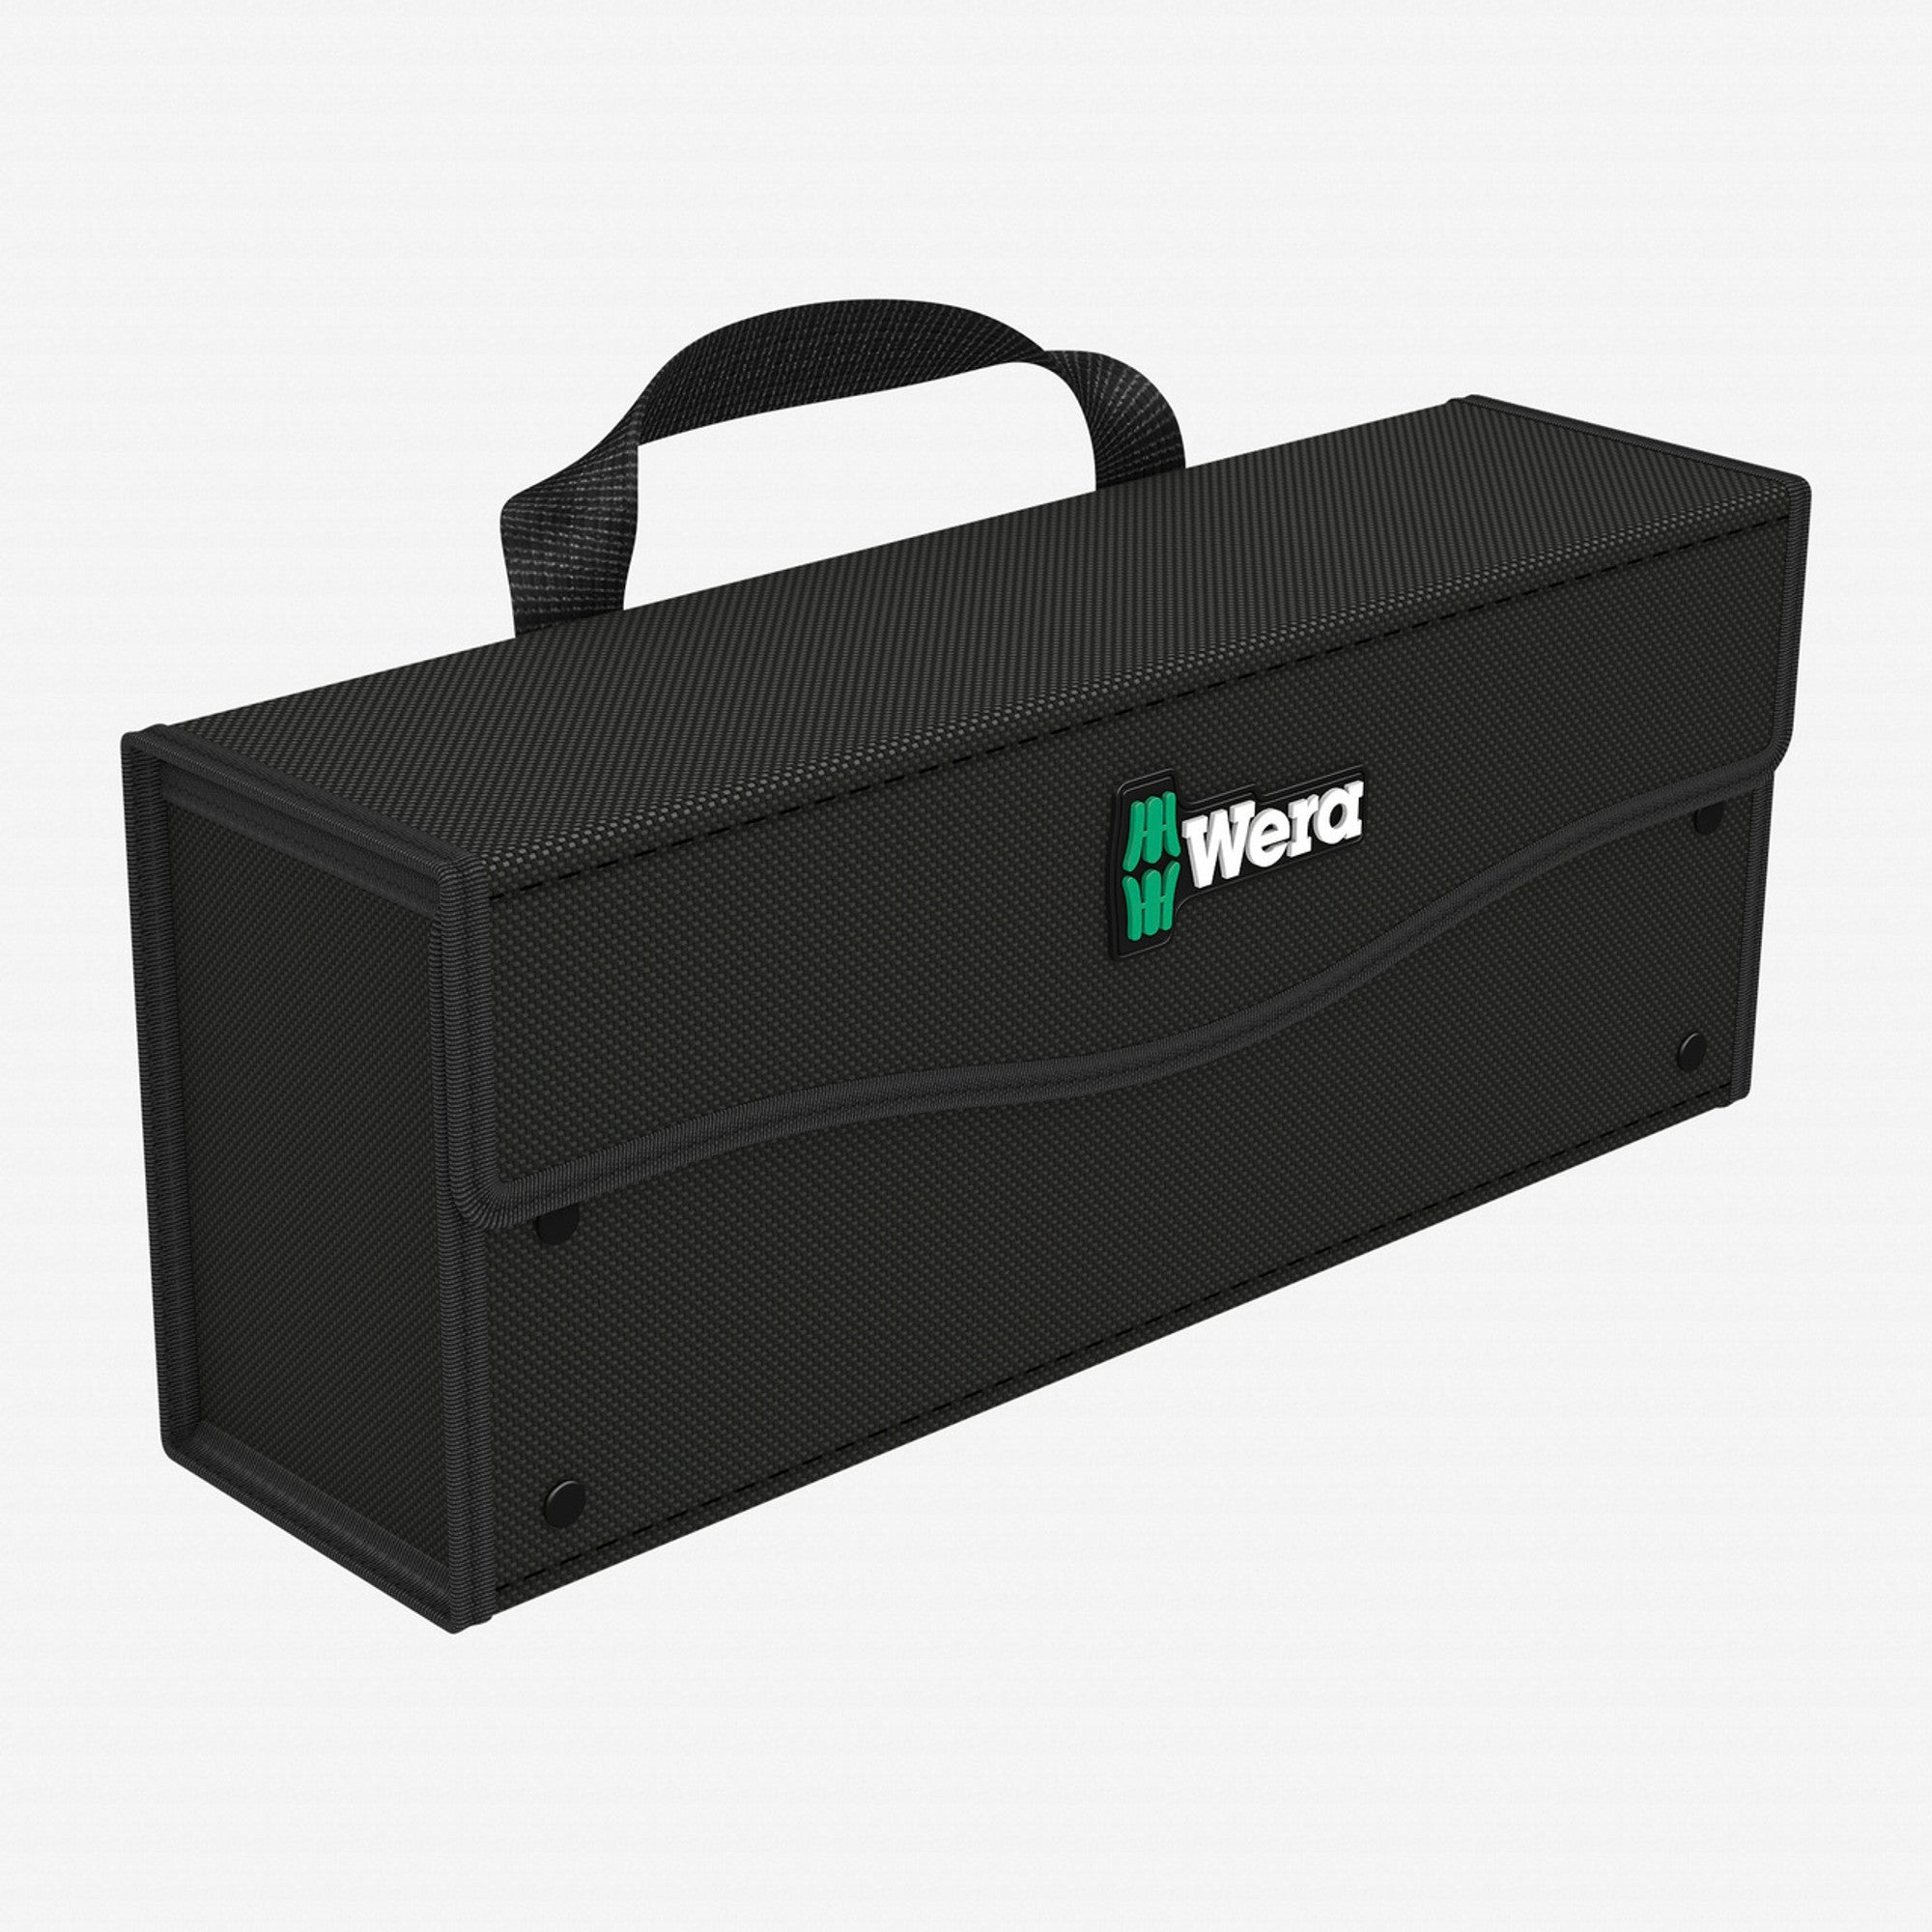 Wera 2go 3 stable and robust Tool Box (05004352001)